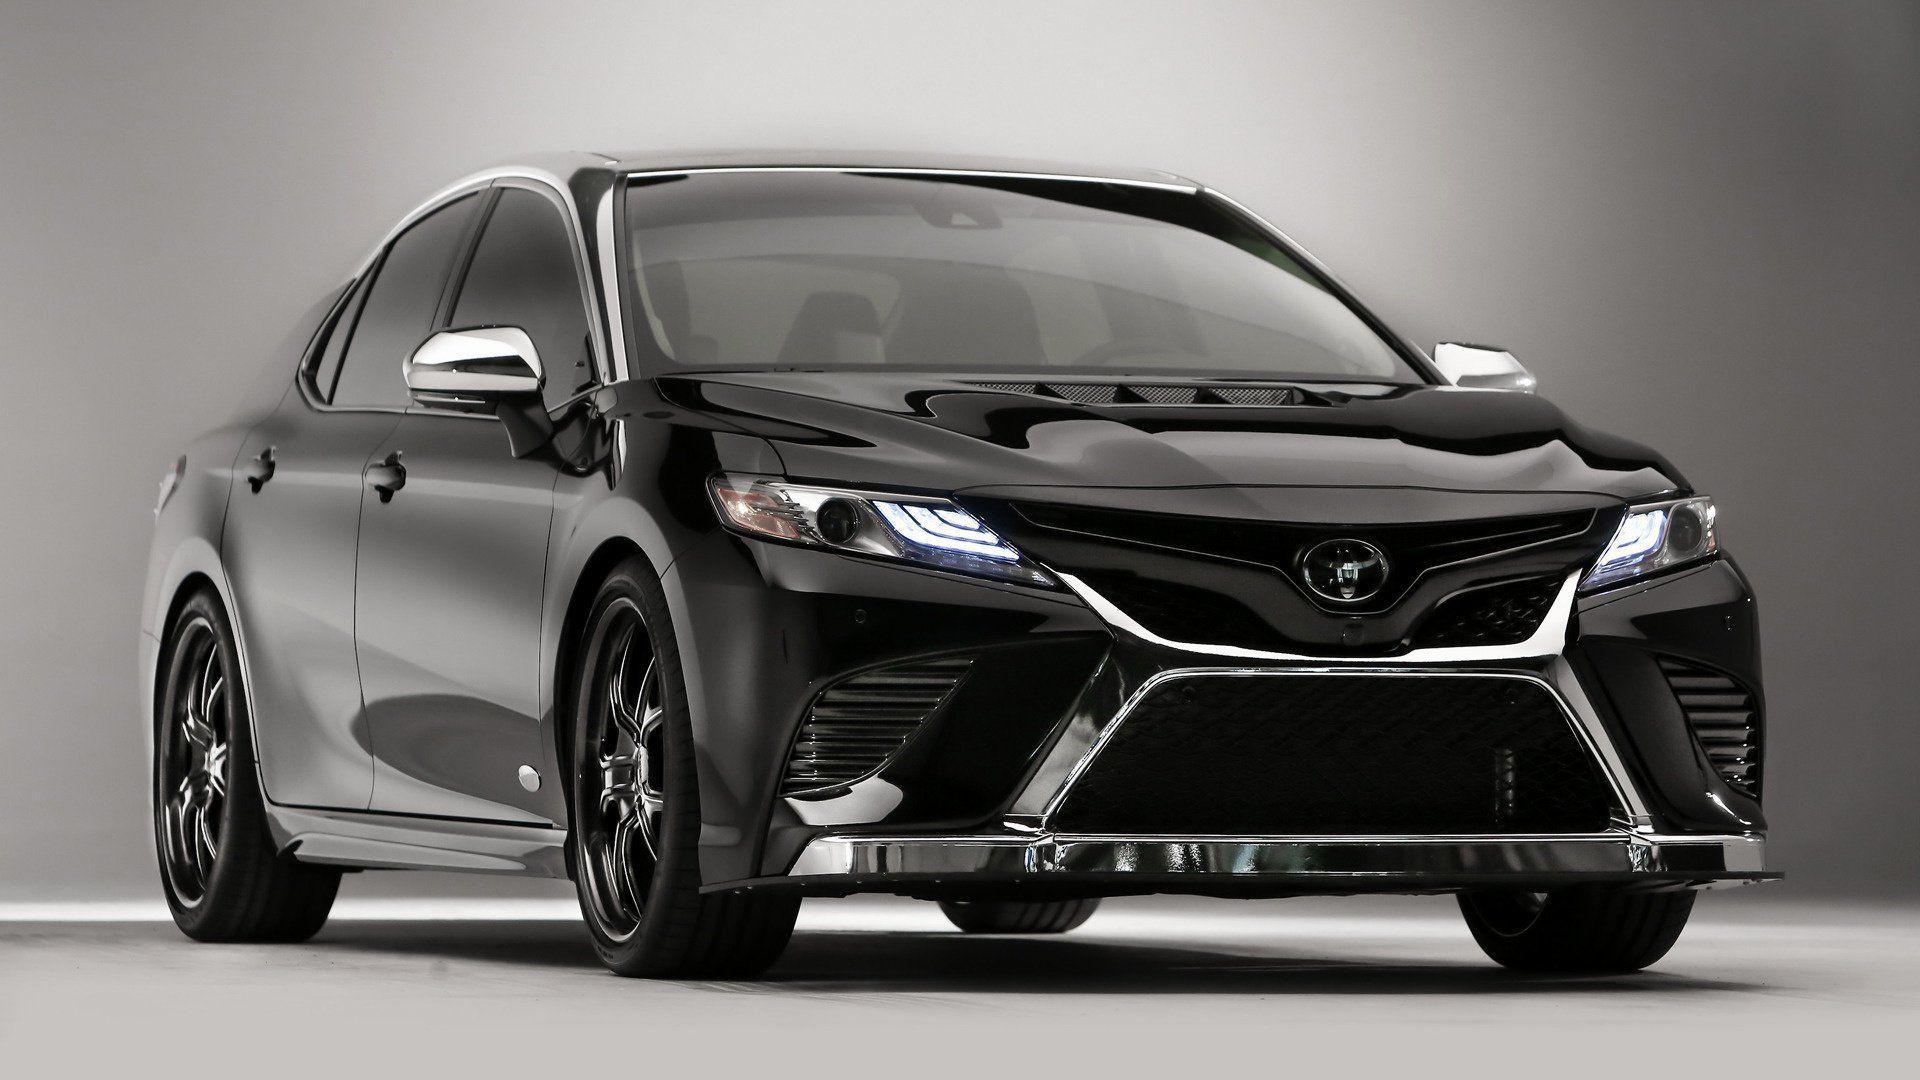 Black Toyota Camry Wallpapers Top Free Black Toyota Camry Backgrounds